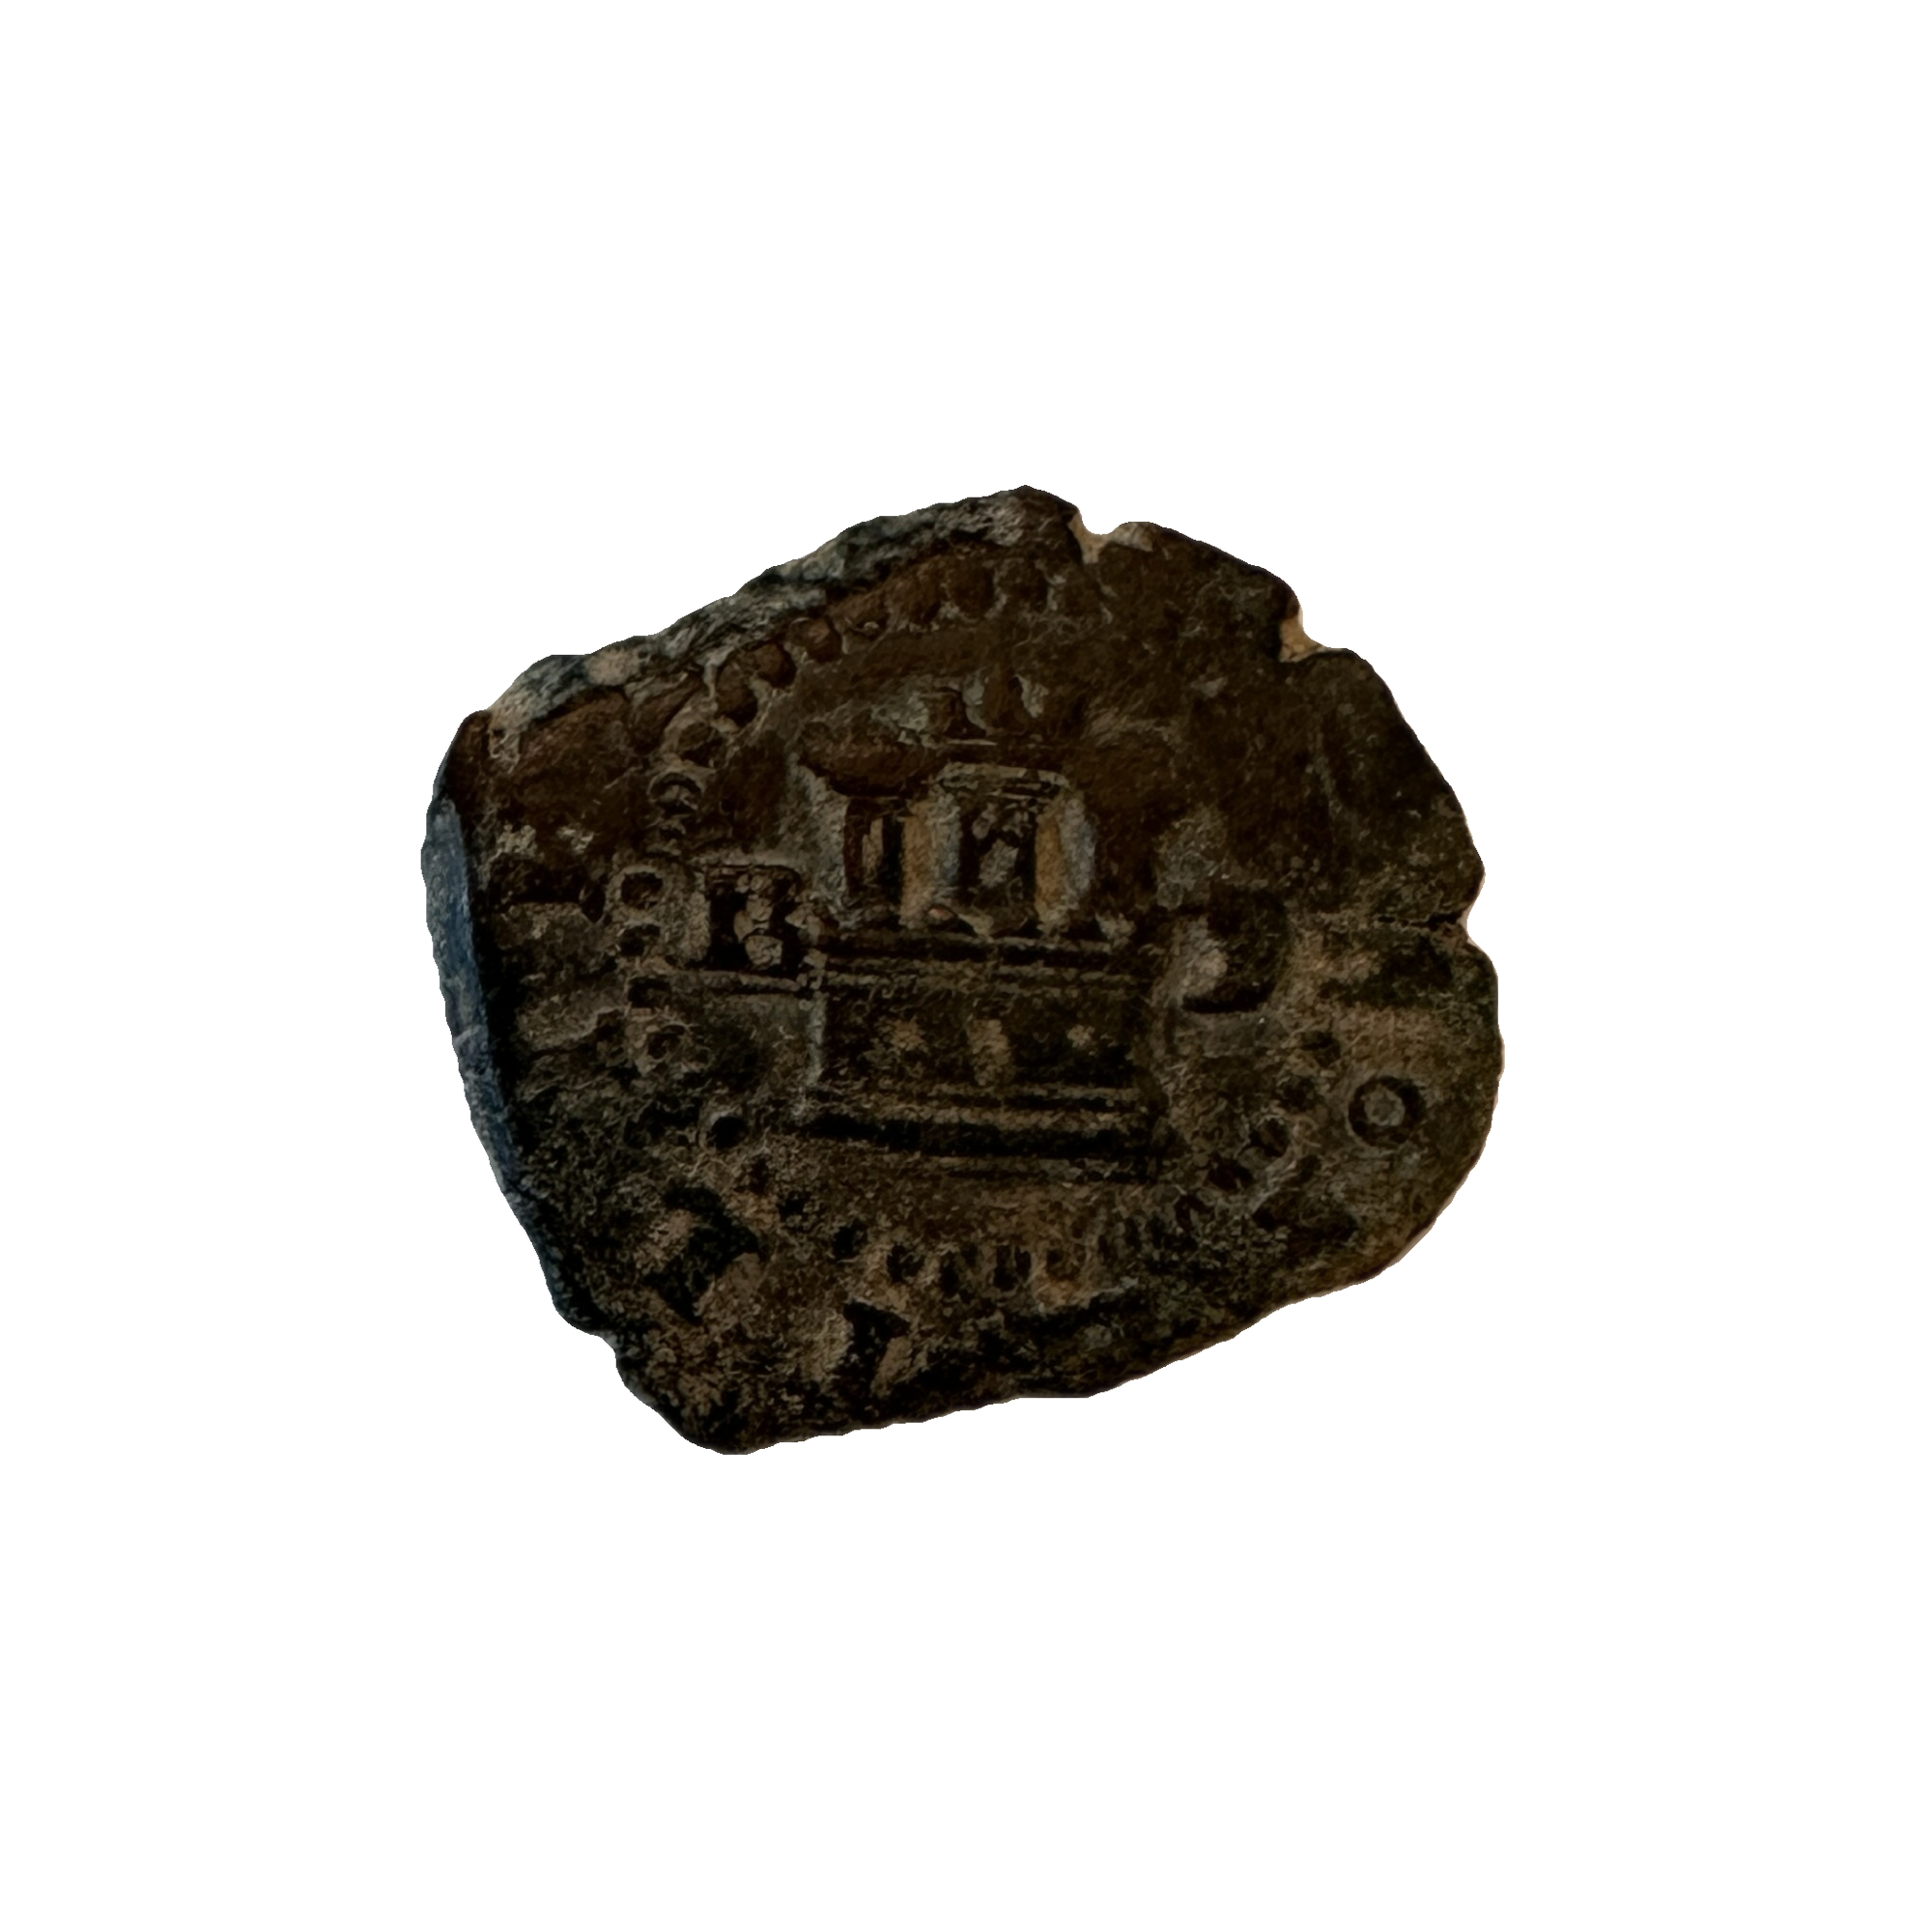 a bronze pirate coin with a great shape, beautiful patina, and exceptional detail. This spanish coin is from the 1600s